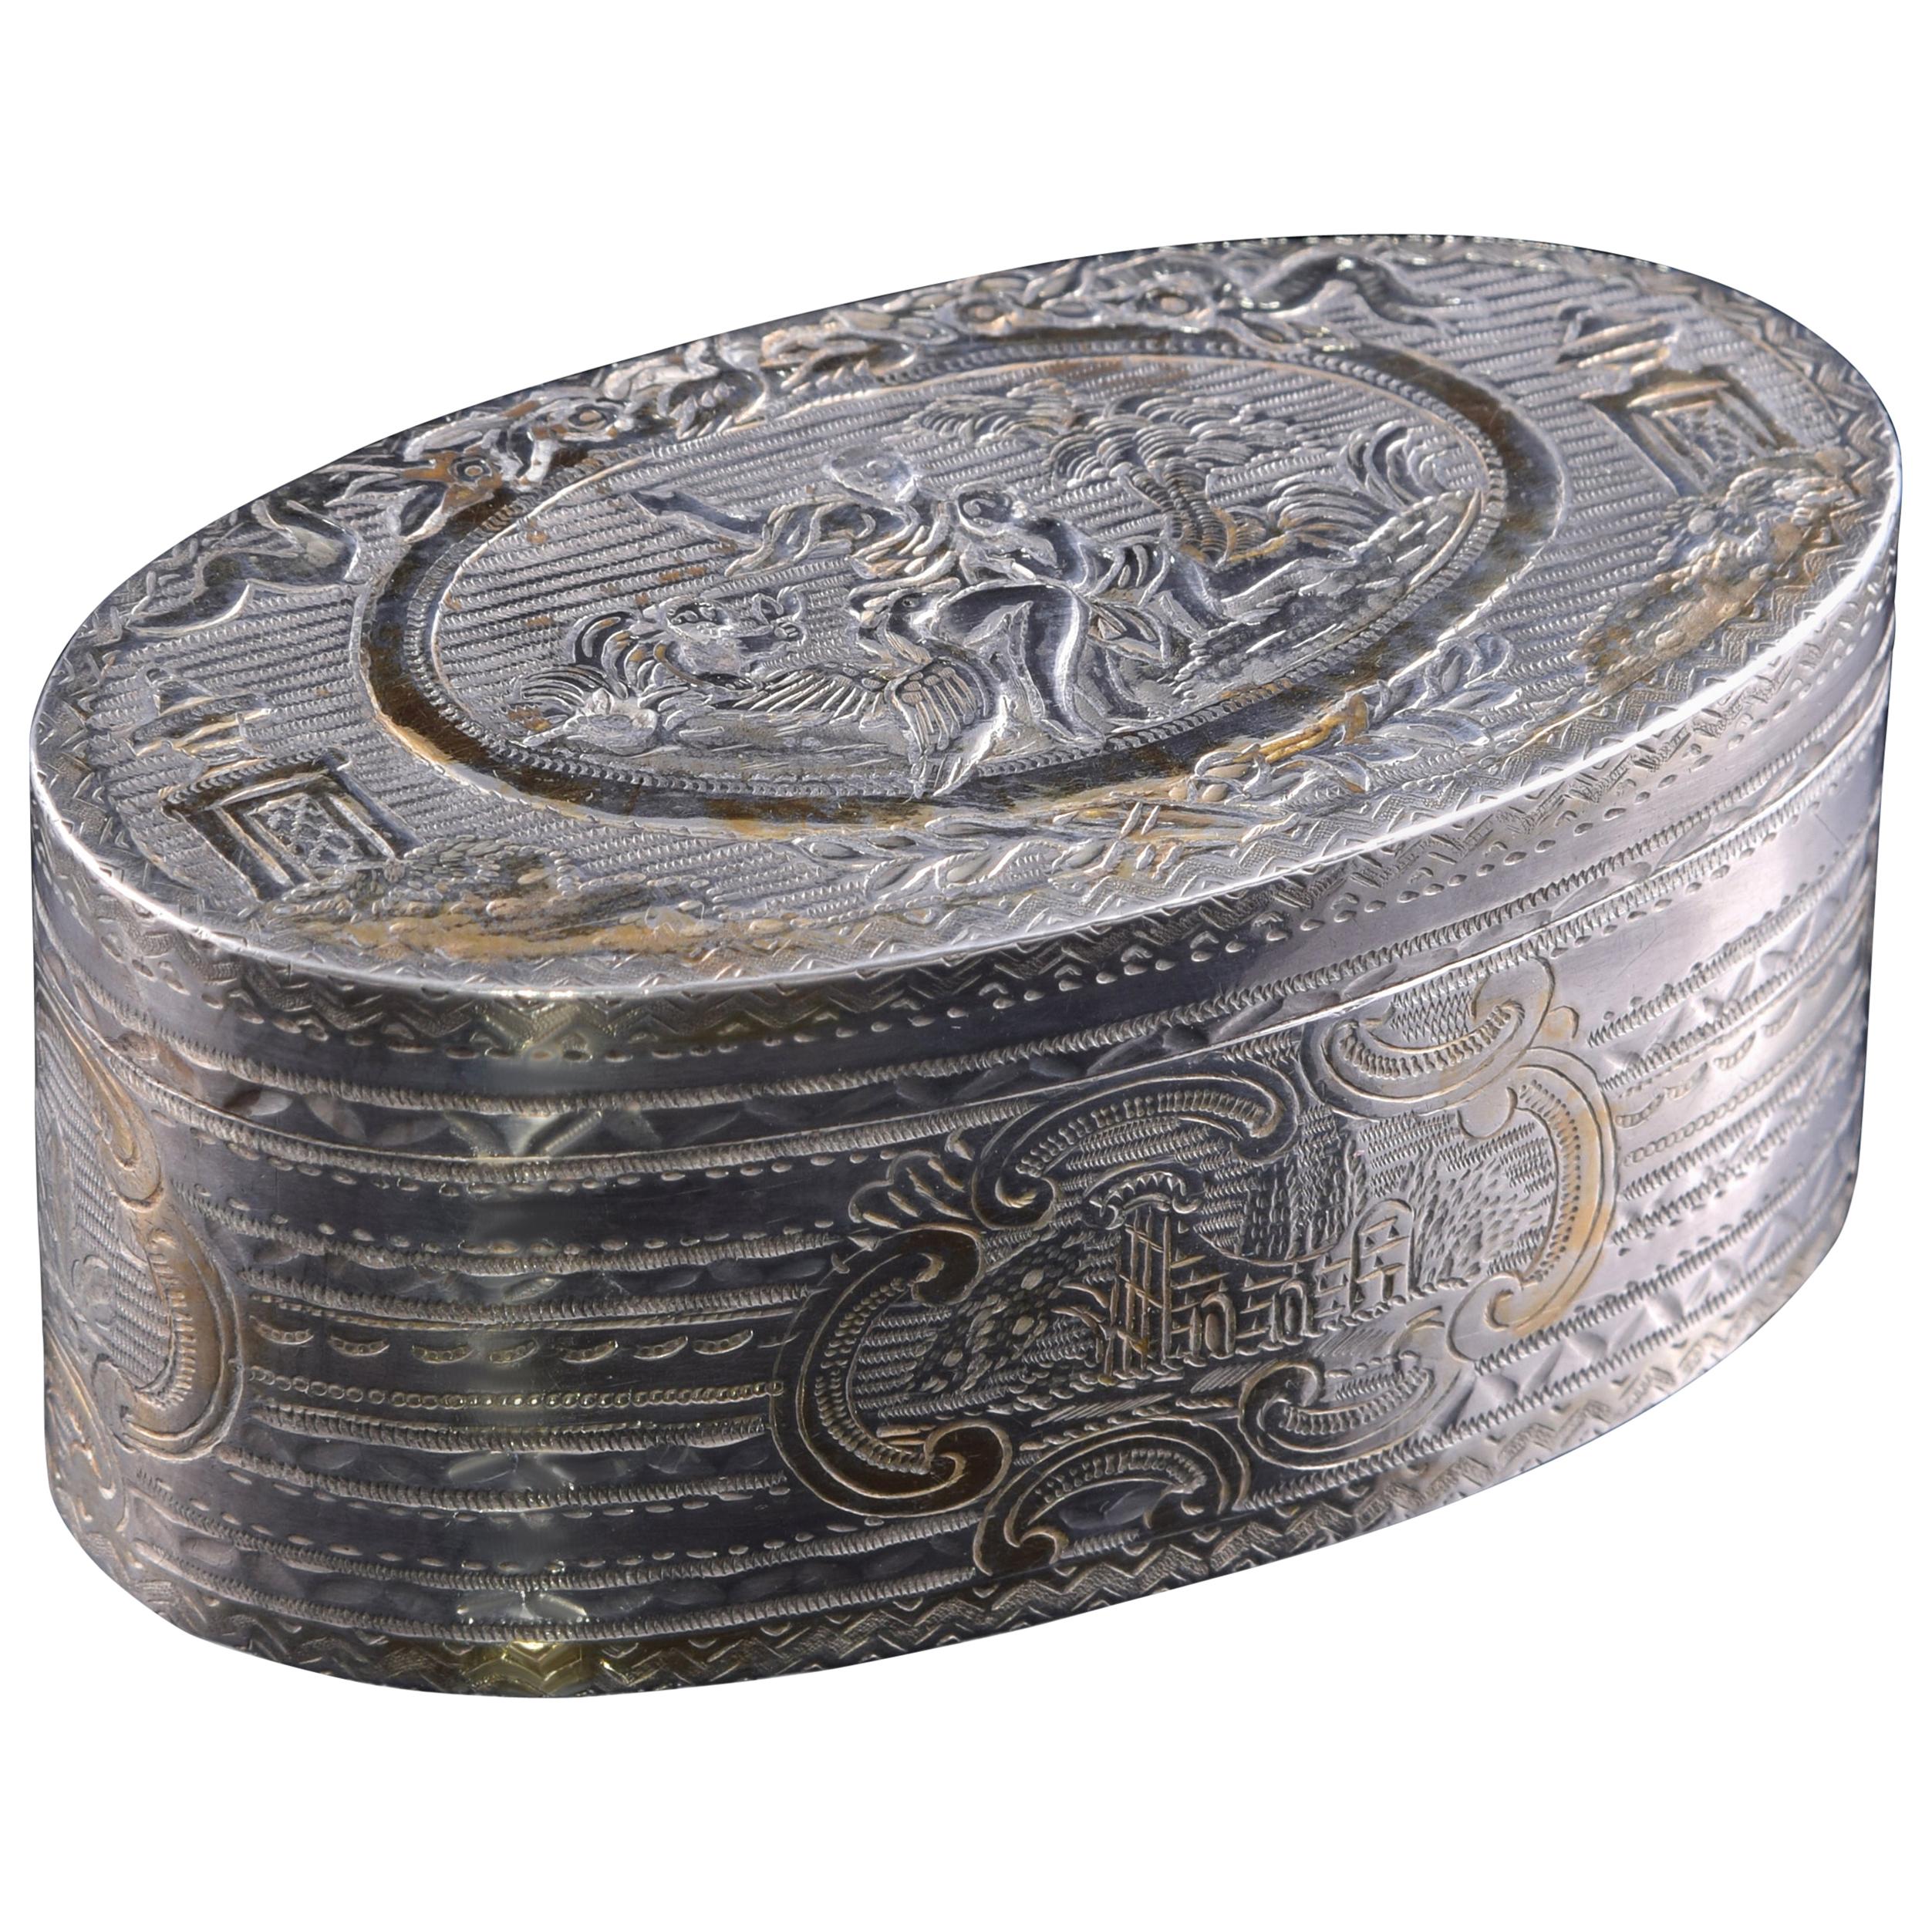 Silver Oval Box, 19th Century, with Hallmarks For Sale